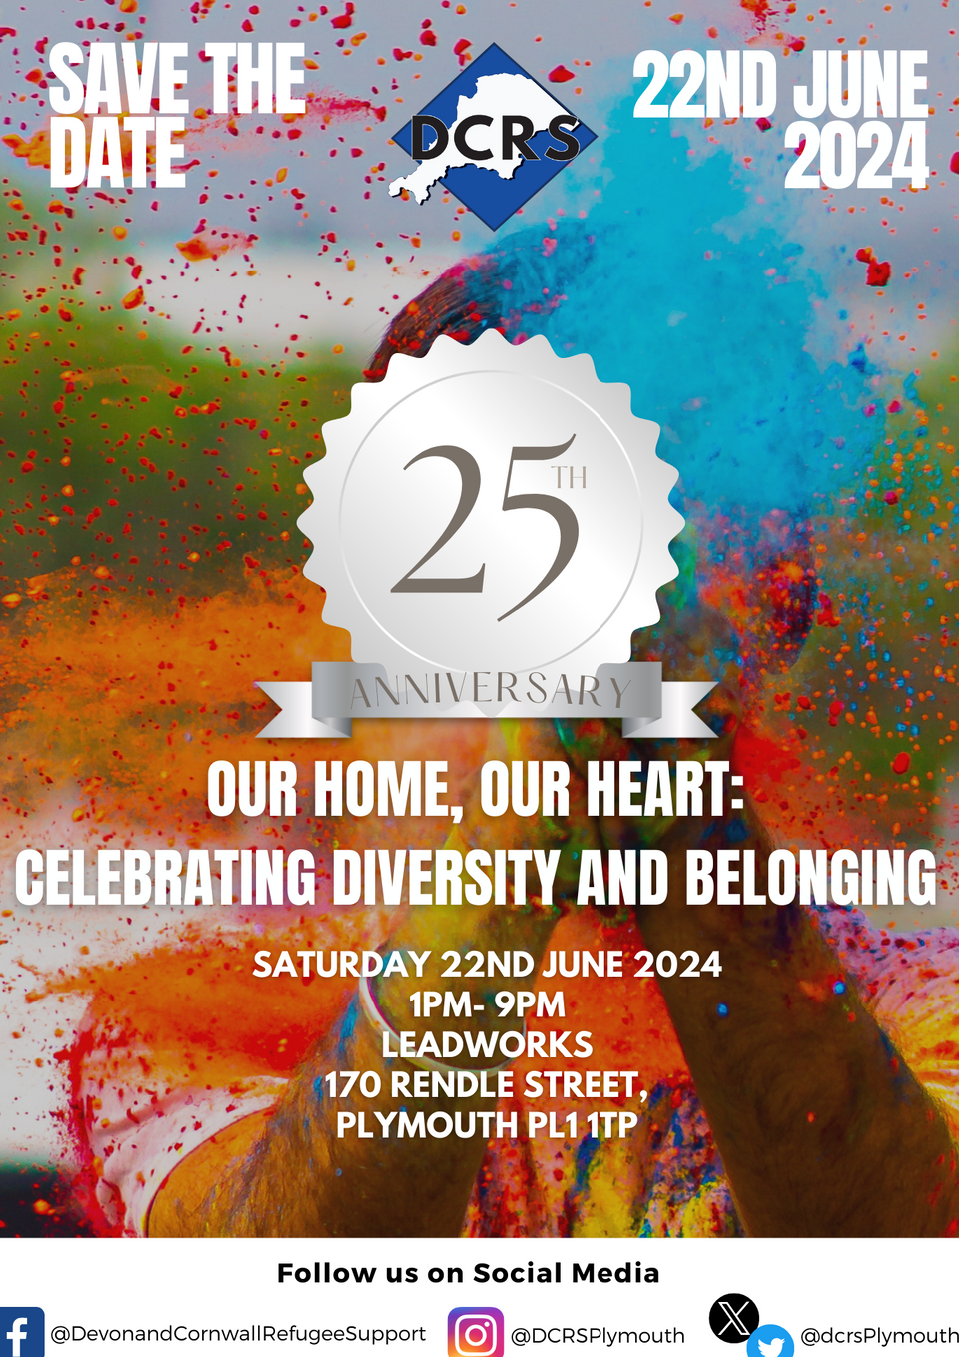 Our Home, Our Heart: Celebrating Diversity and Belonging